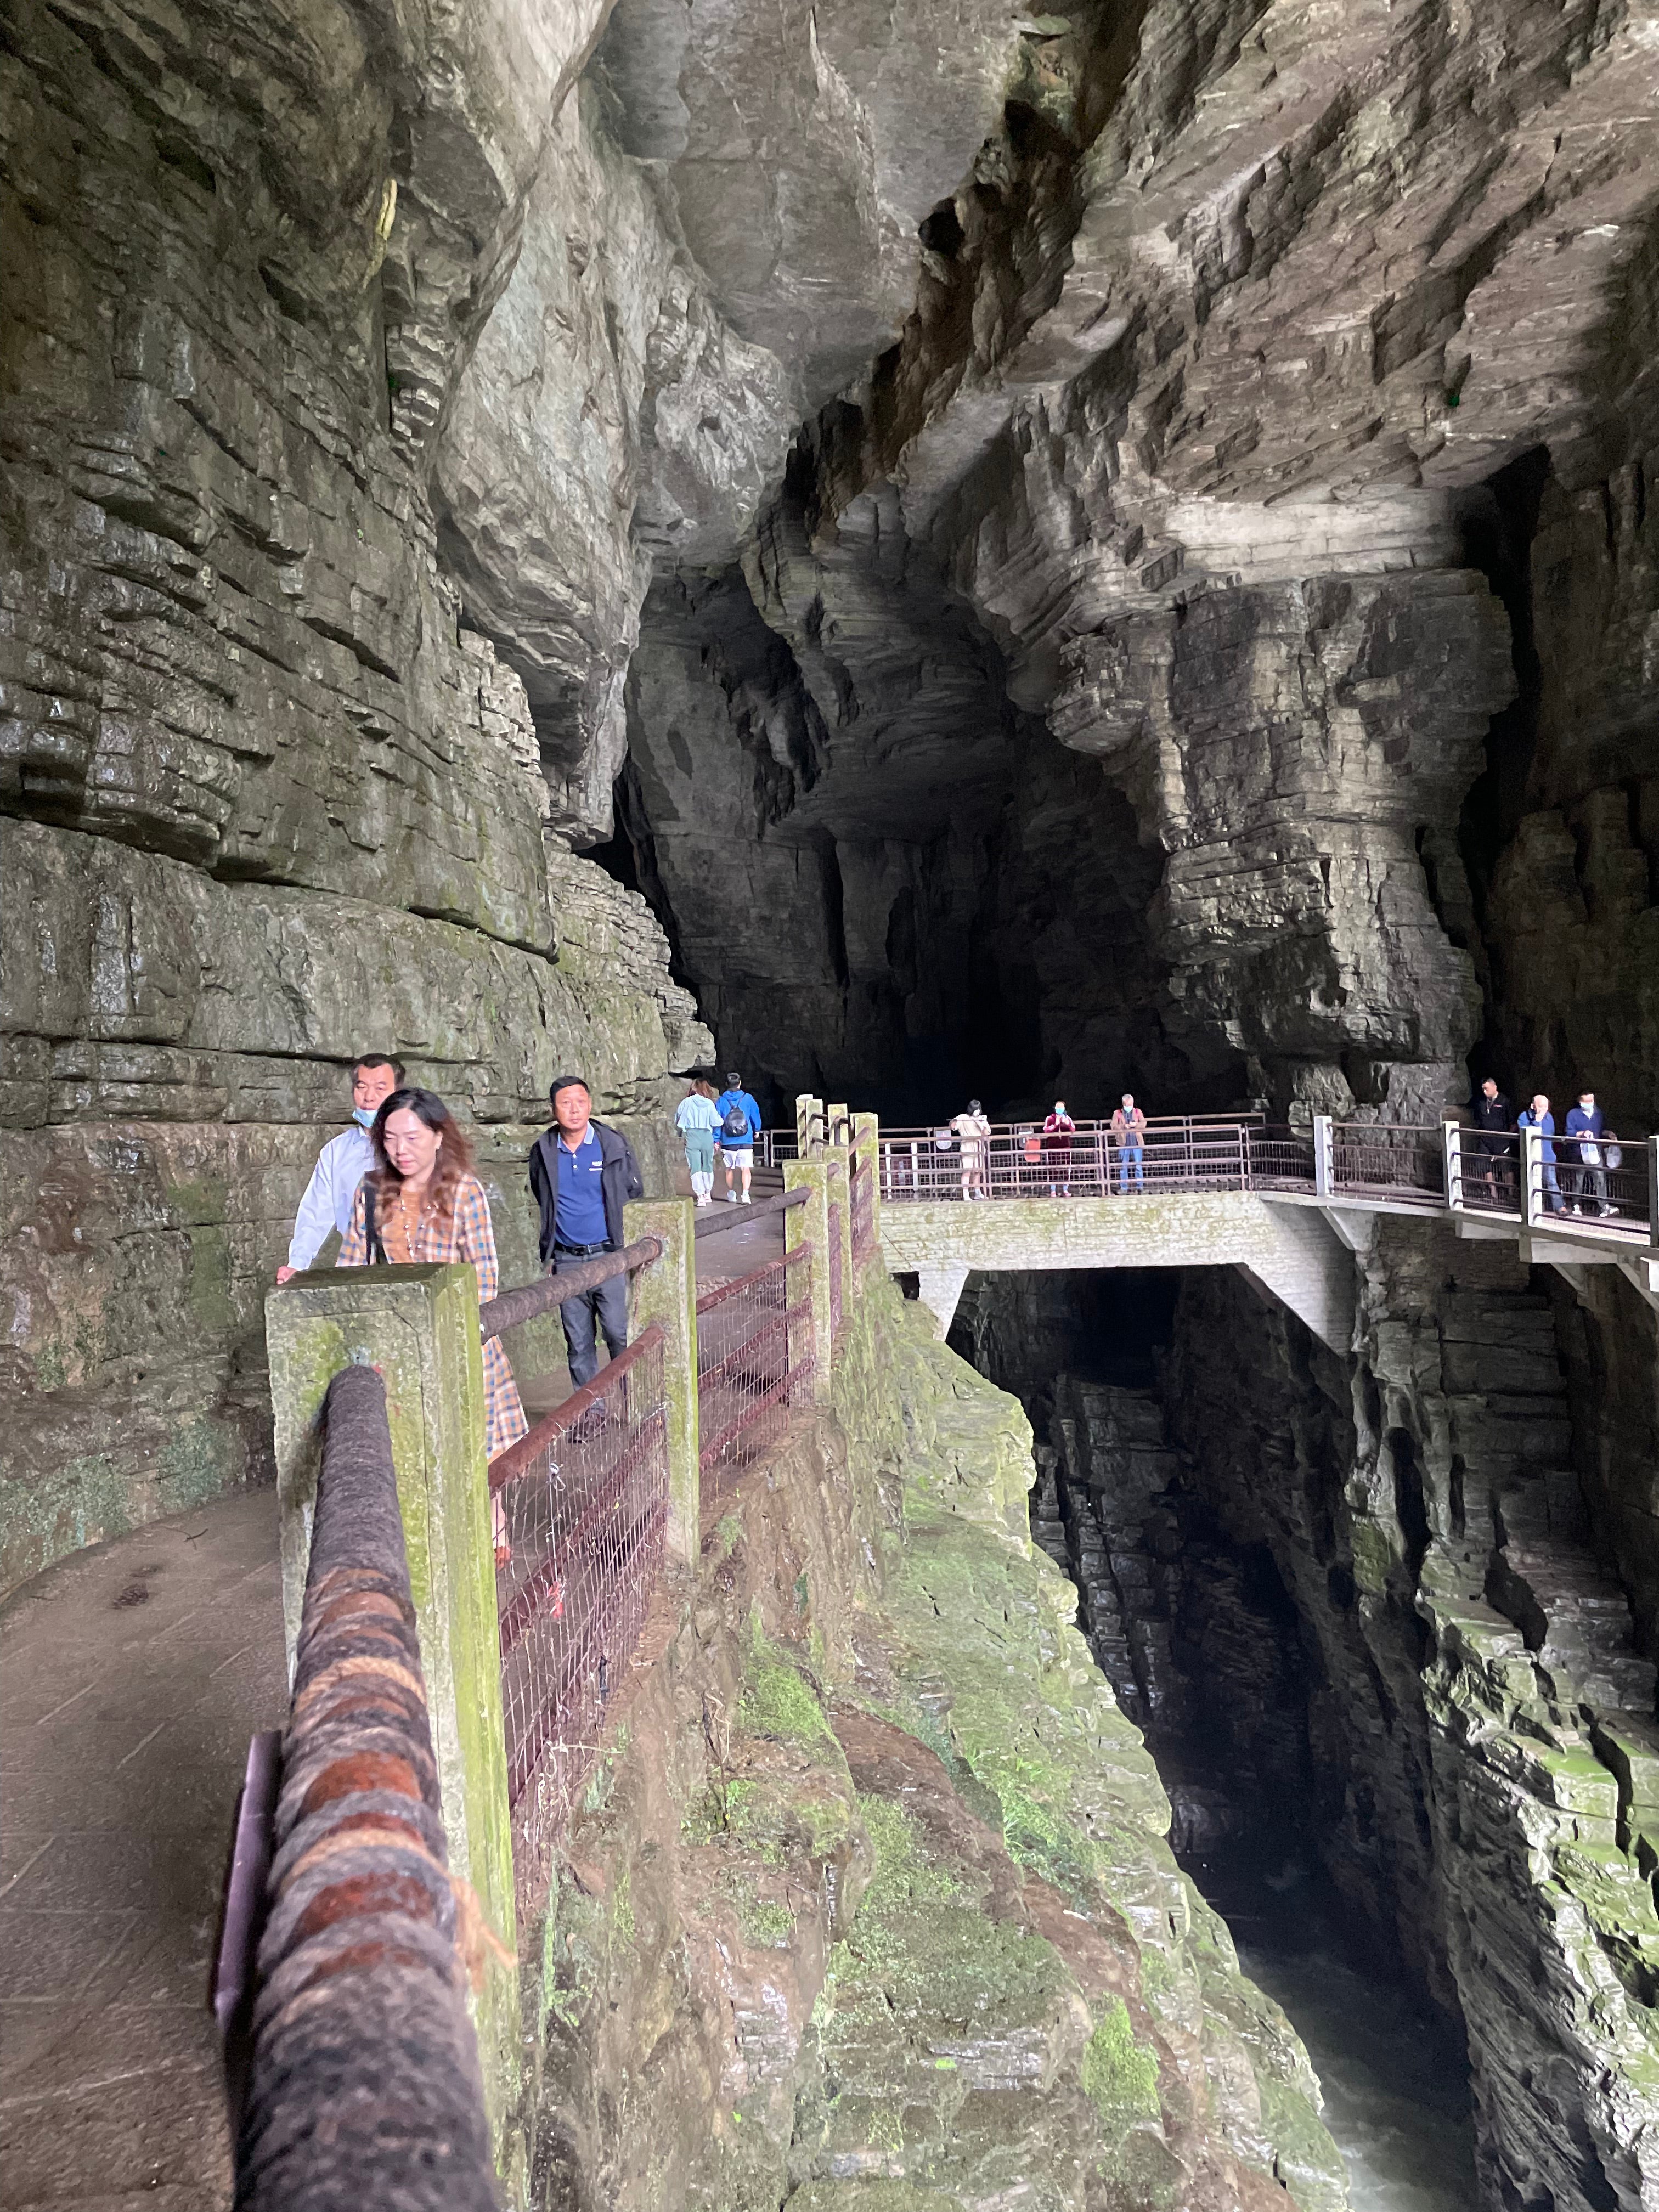 Tourists pass over a bridge above where the Qing River flows through Tenglong Cave